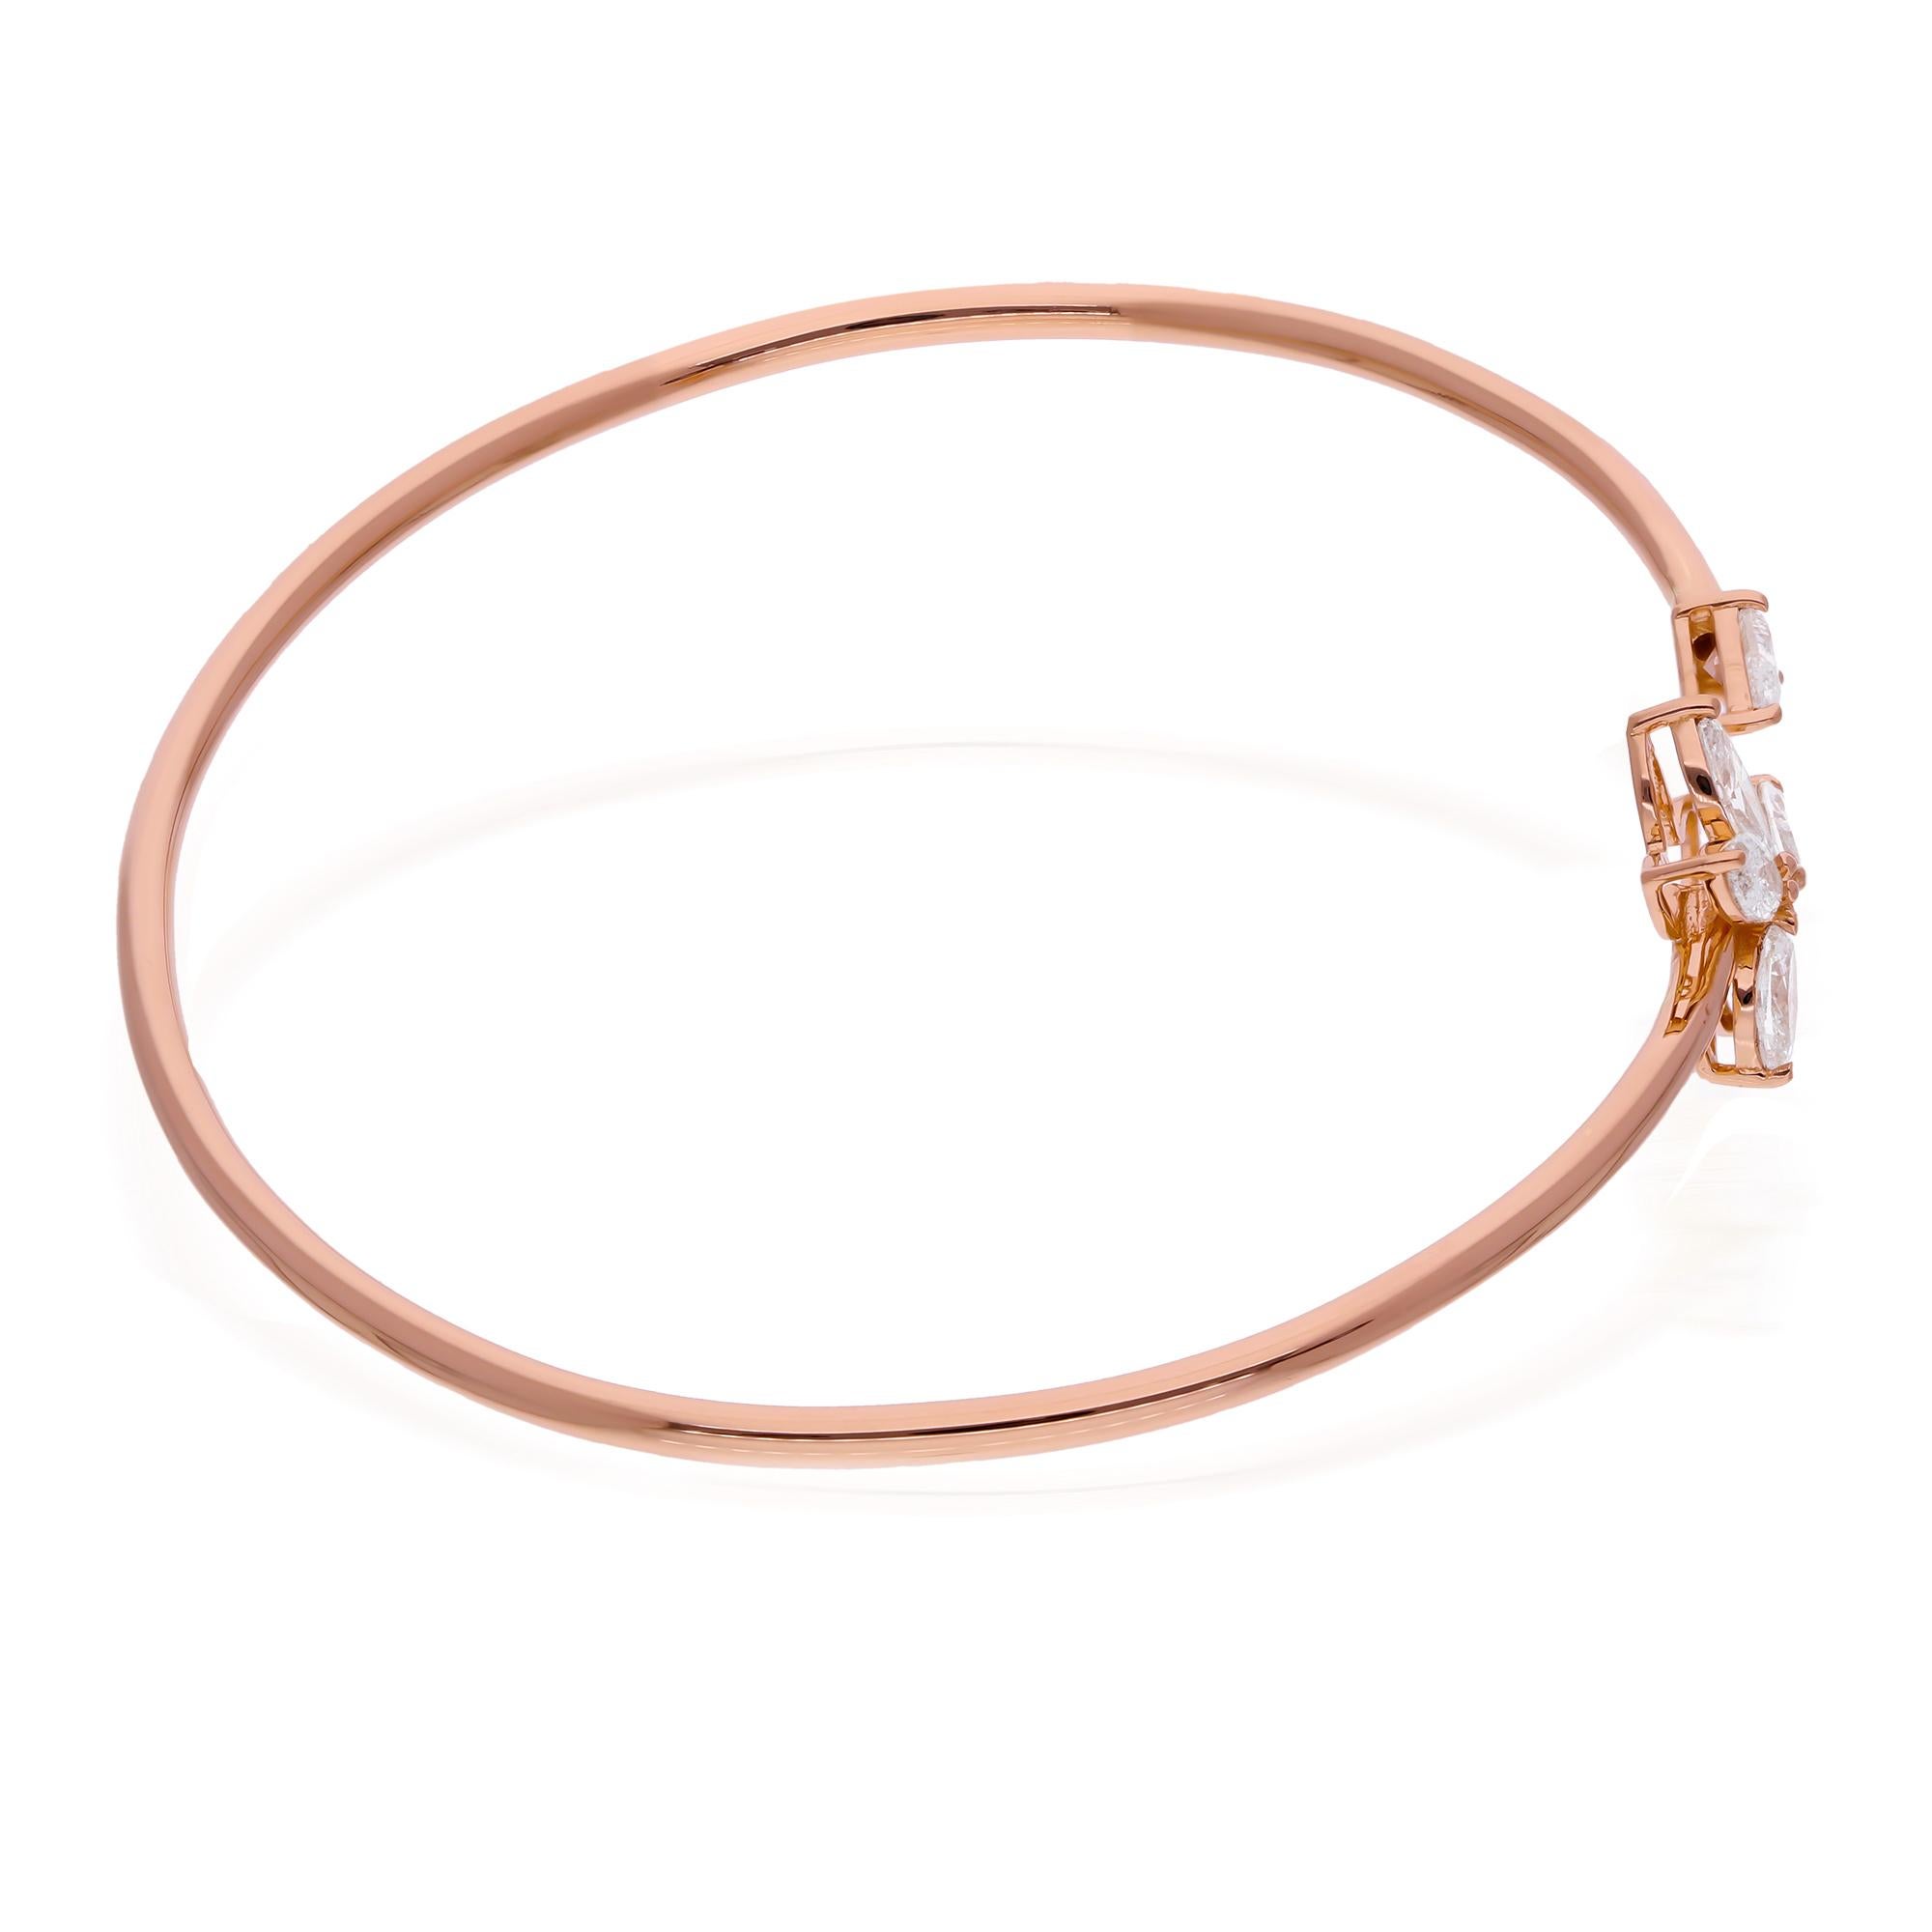 Indulge in timeless elegance with this exquisite Marquise Diamond Cuff Bangle Bracelet, crafted in luxurious 18 Karat Rose Gold. Every facet of this piece speaks to sophistication and grace, making it a captivating addition to any jewelry